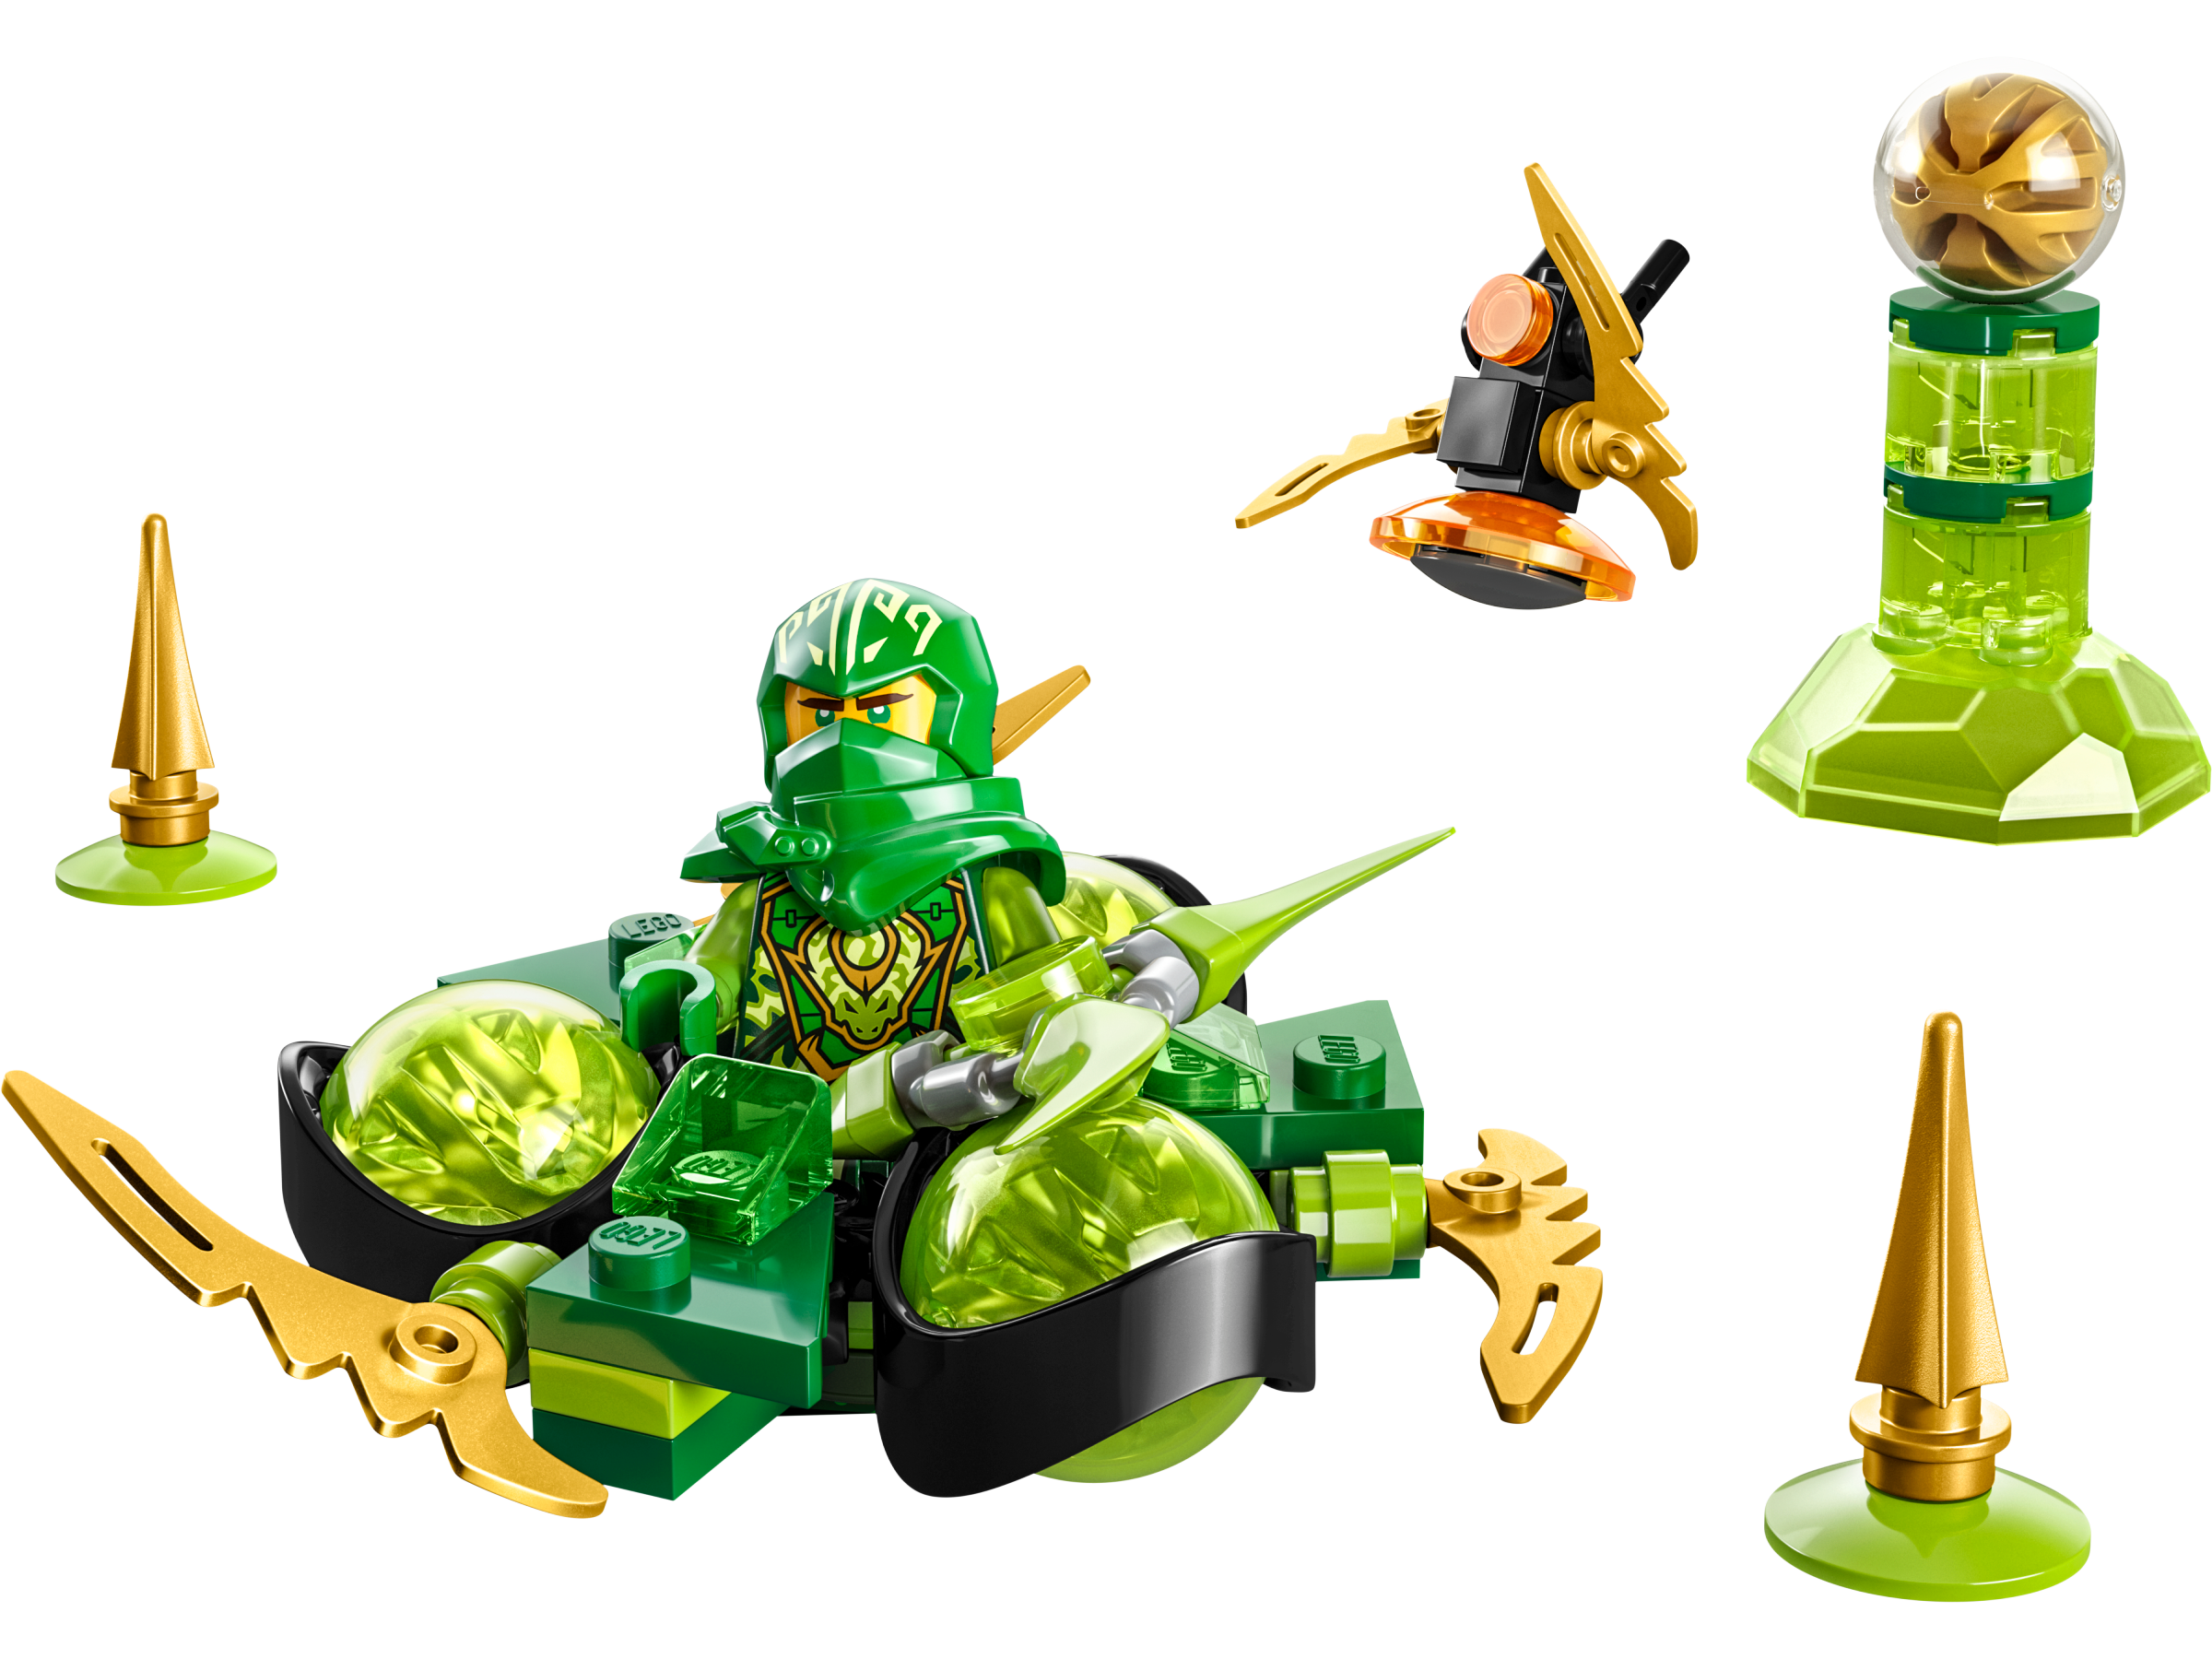 LEGO Ninjago 71765 Ninja Ultra Combo Mech - Hold onthis isn't Voltron?!  [Review] - The Brothers Brick